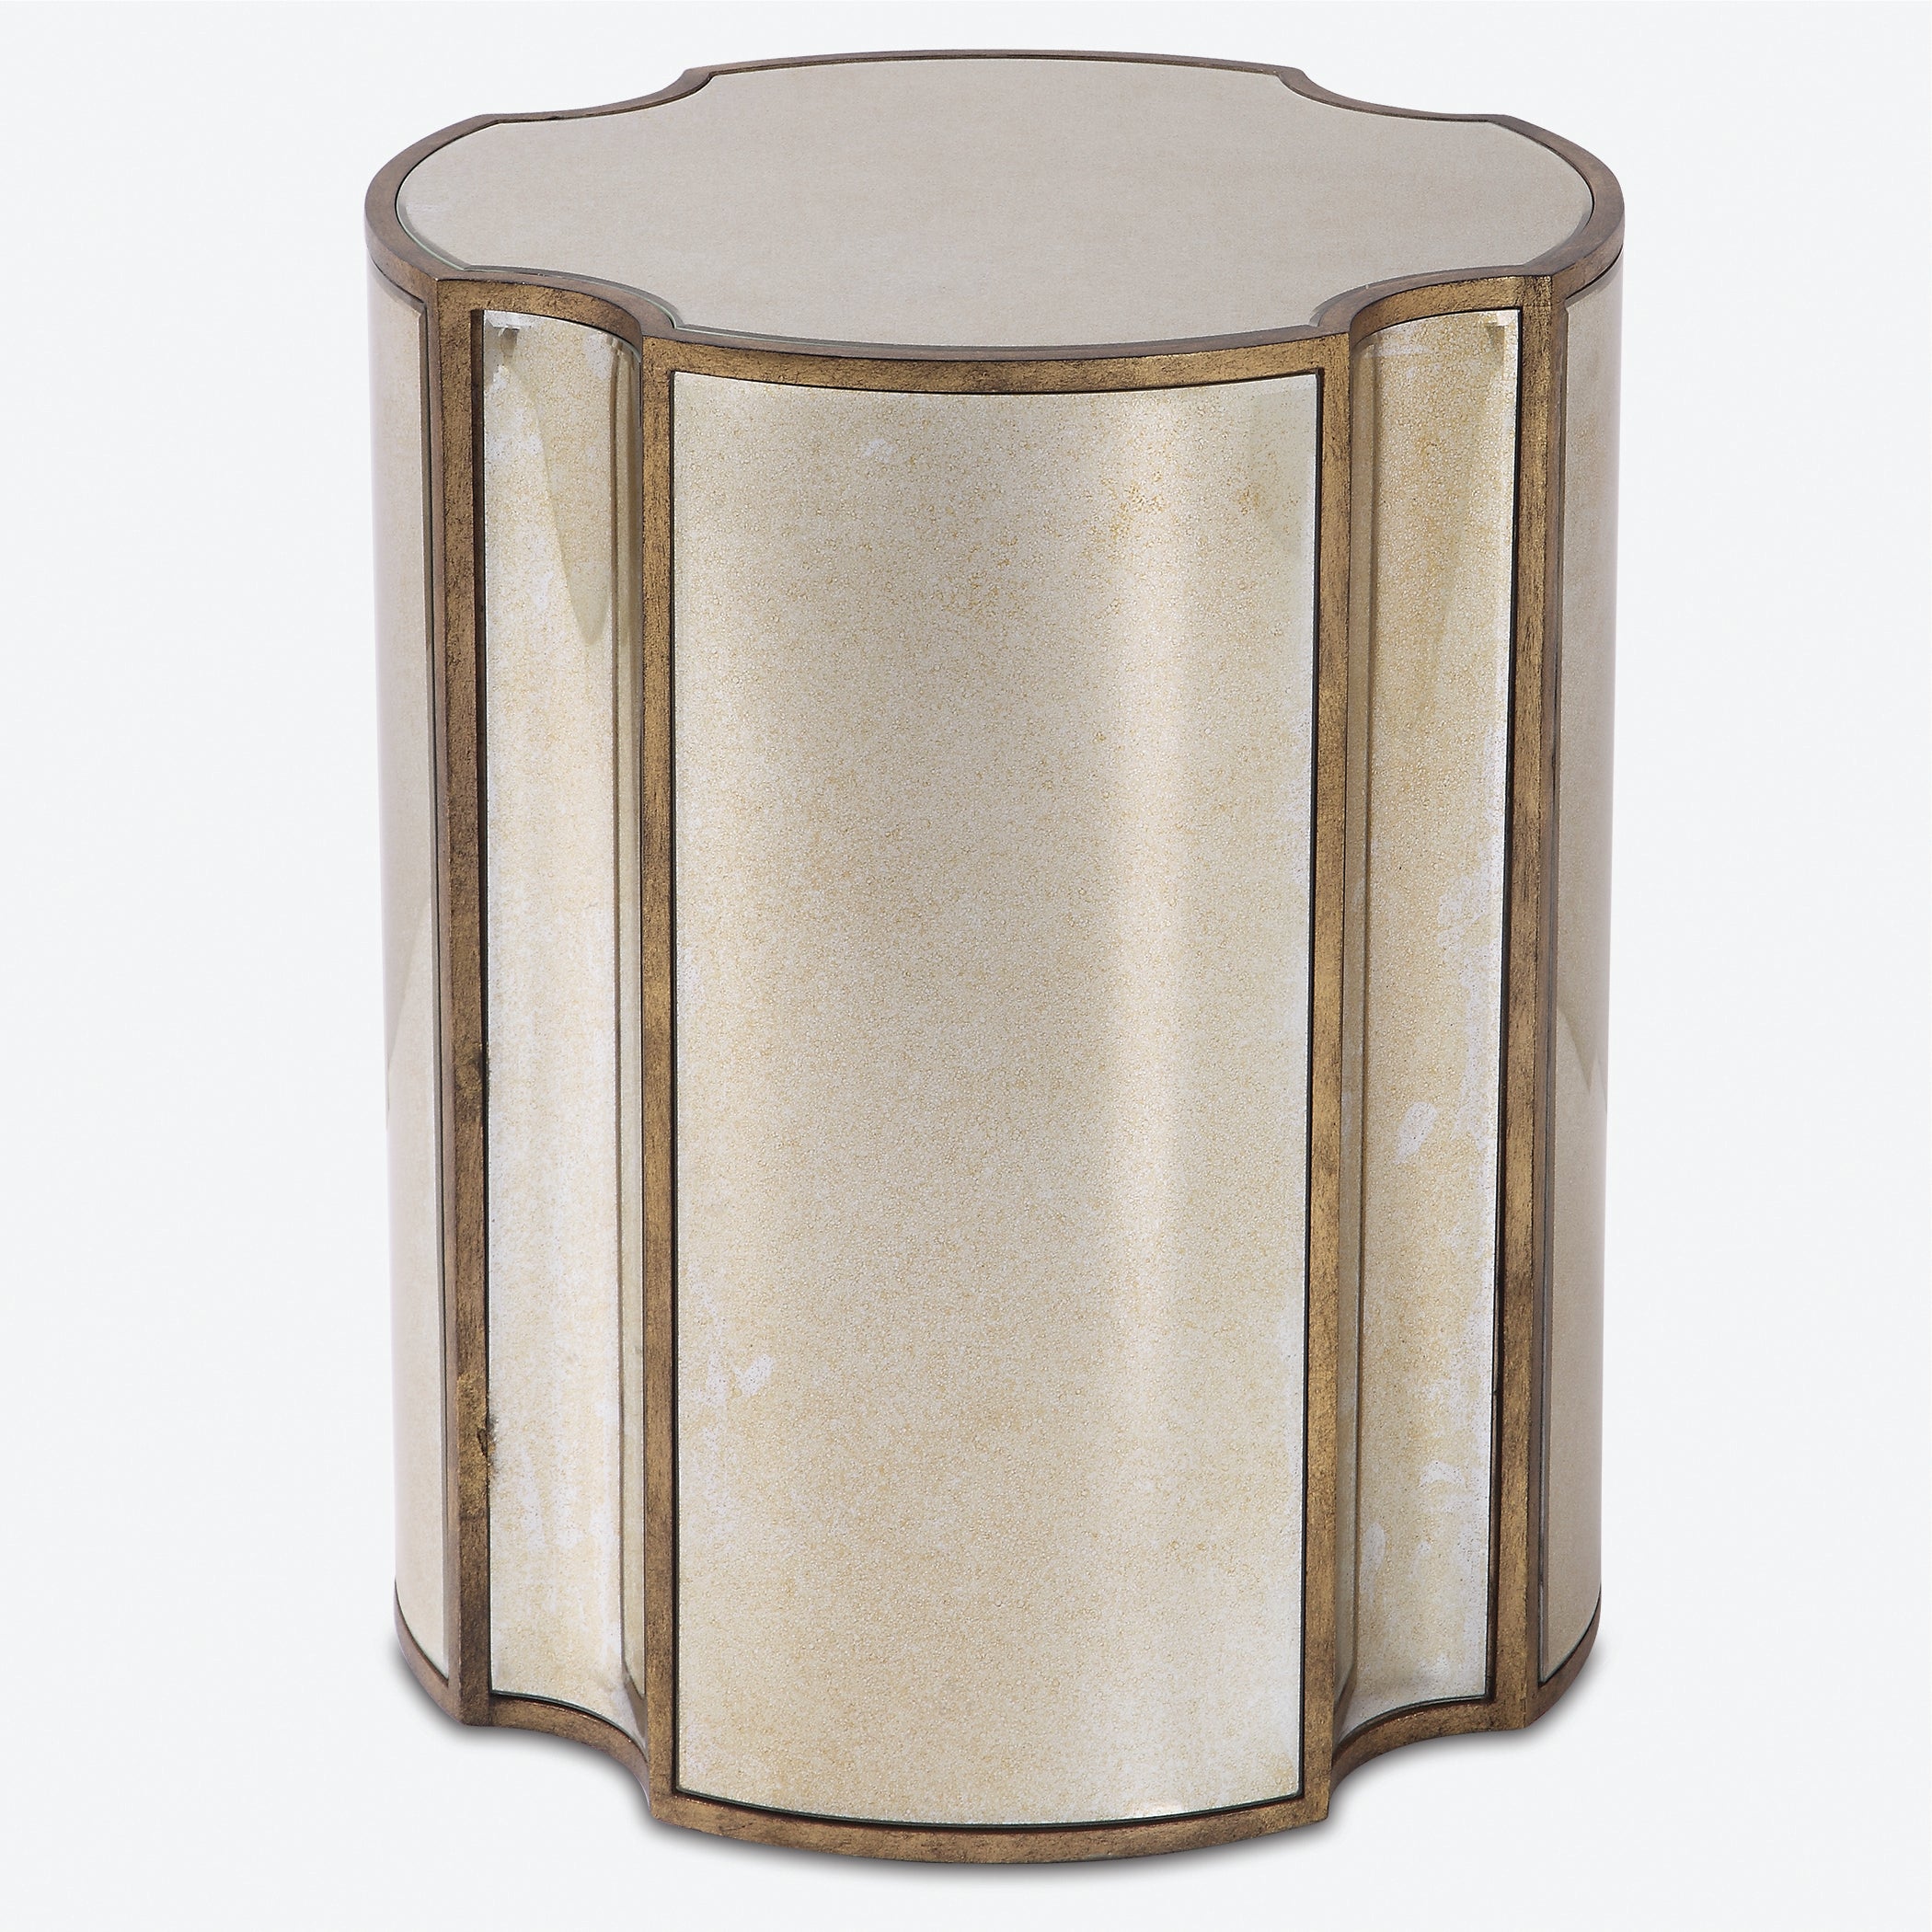 Uttermost Harlow Accent & End Tables Accent & End Tables Uttermost   